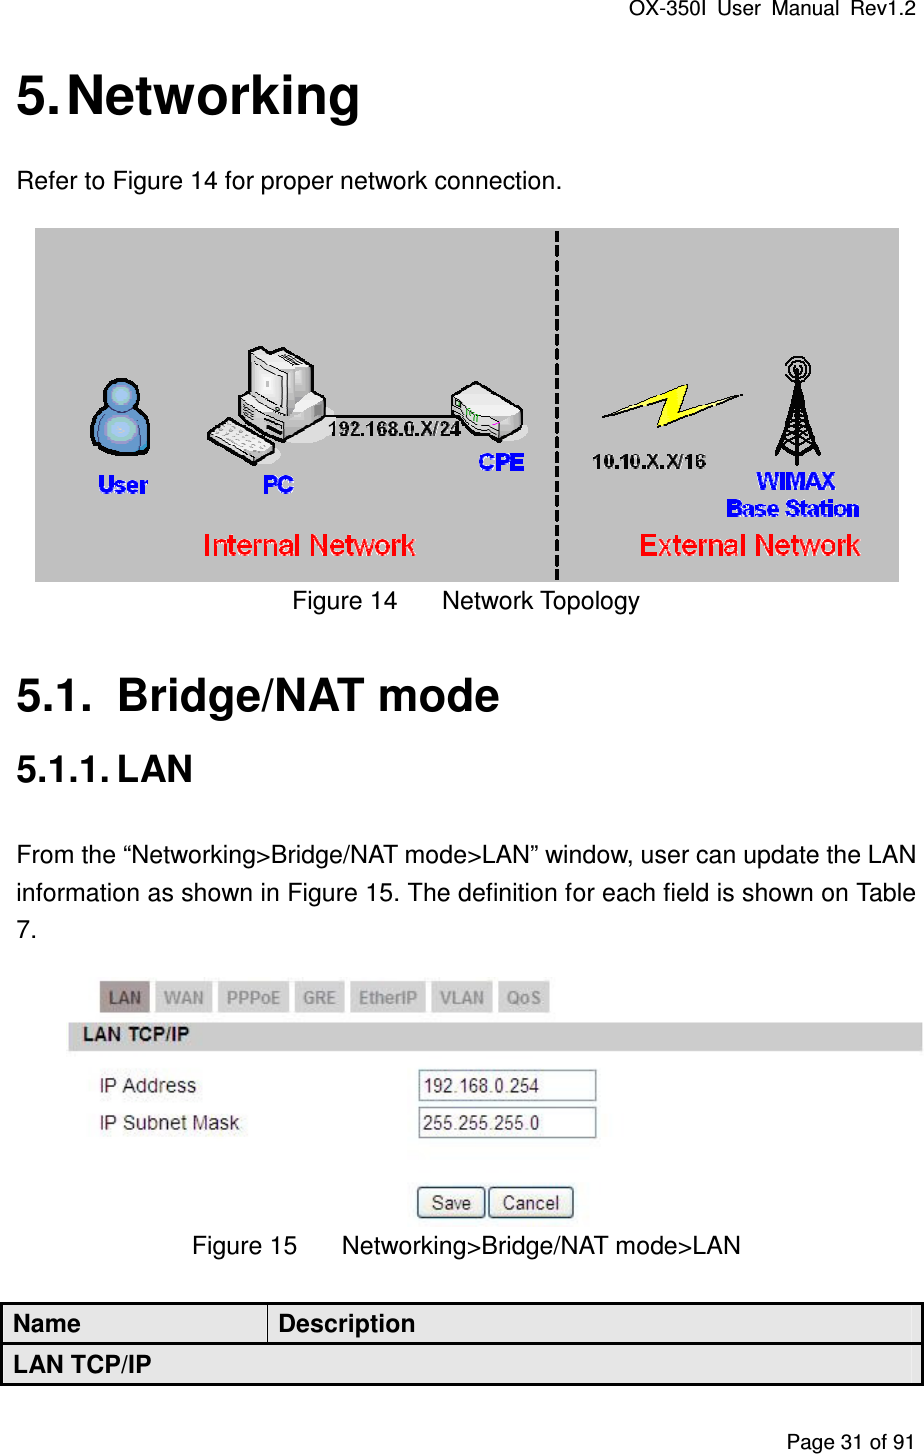 OX-350I  User  Manual  Rev1.2 Page 31 of 91 5. Networking Refer to Figure 14 for proper network connection.  Figure 14  Network Topology 5.1.  Bridge/NAT mode 5.1.1. LAN From the “Networking&gt;Bridge/NAT mode&gt;LAN” window, user can update the LAN information as shown in Figure 15. The definition for each field is shown on Table 7.  Figure 15  Networking&gt;Bridge/NAT mode&gt;LAN Name  Description LAN TCP/IP 